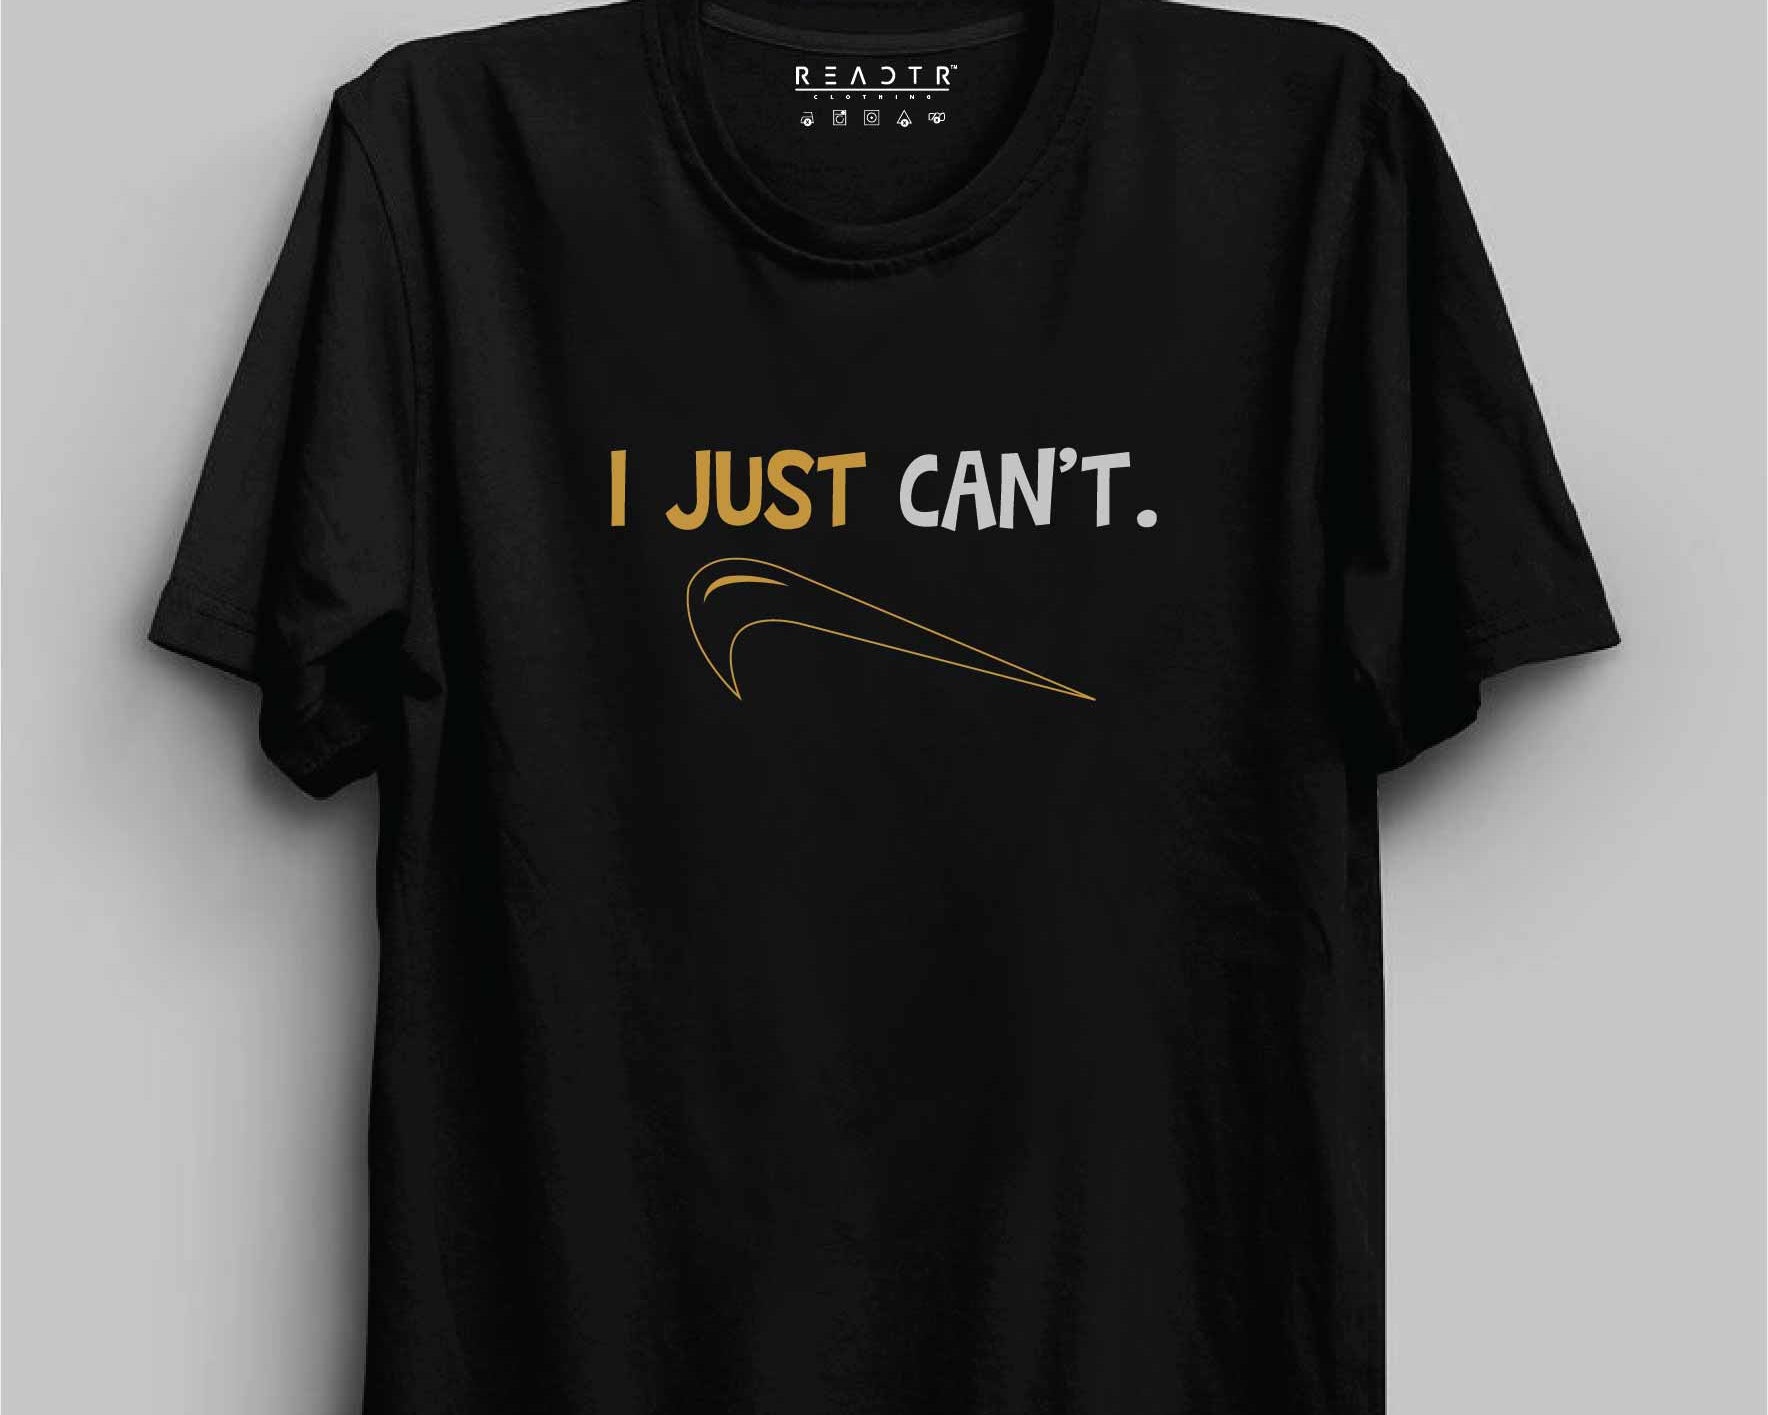 I Just Can't Reactr Tshirts For Men - Eyewearlabs